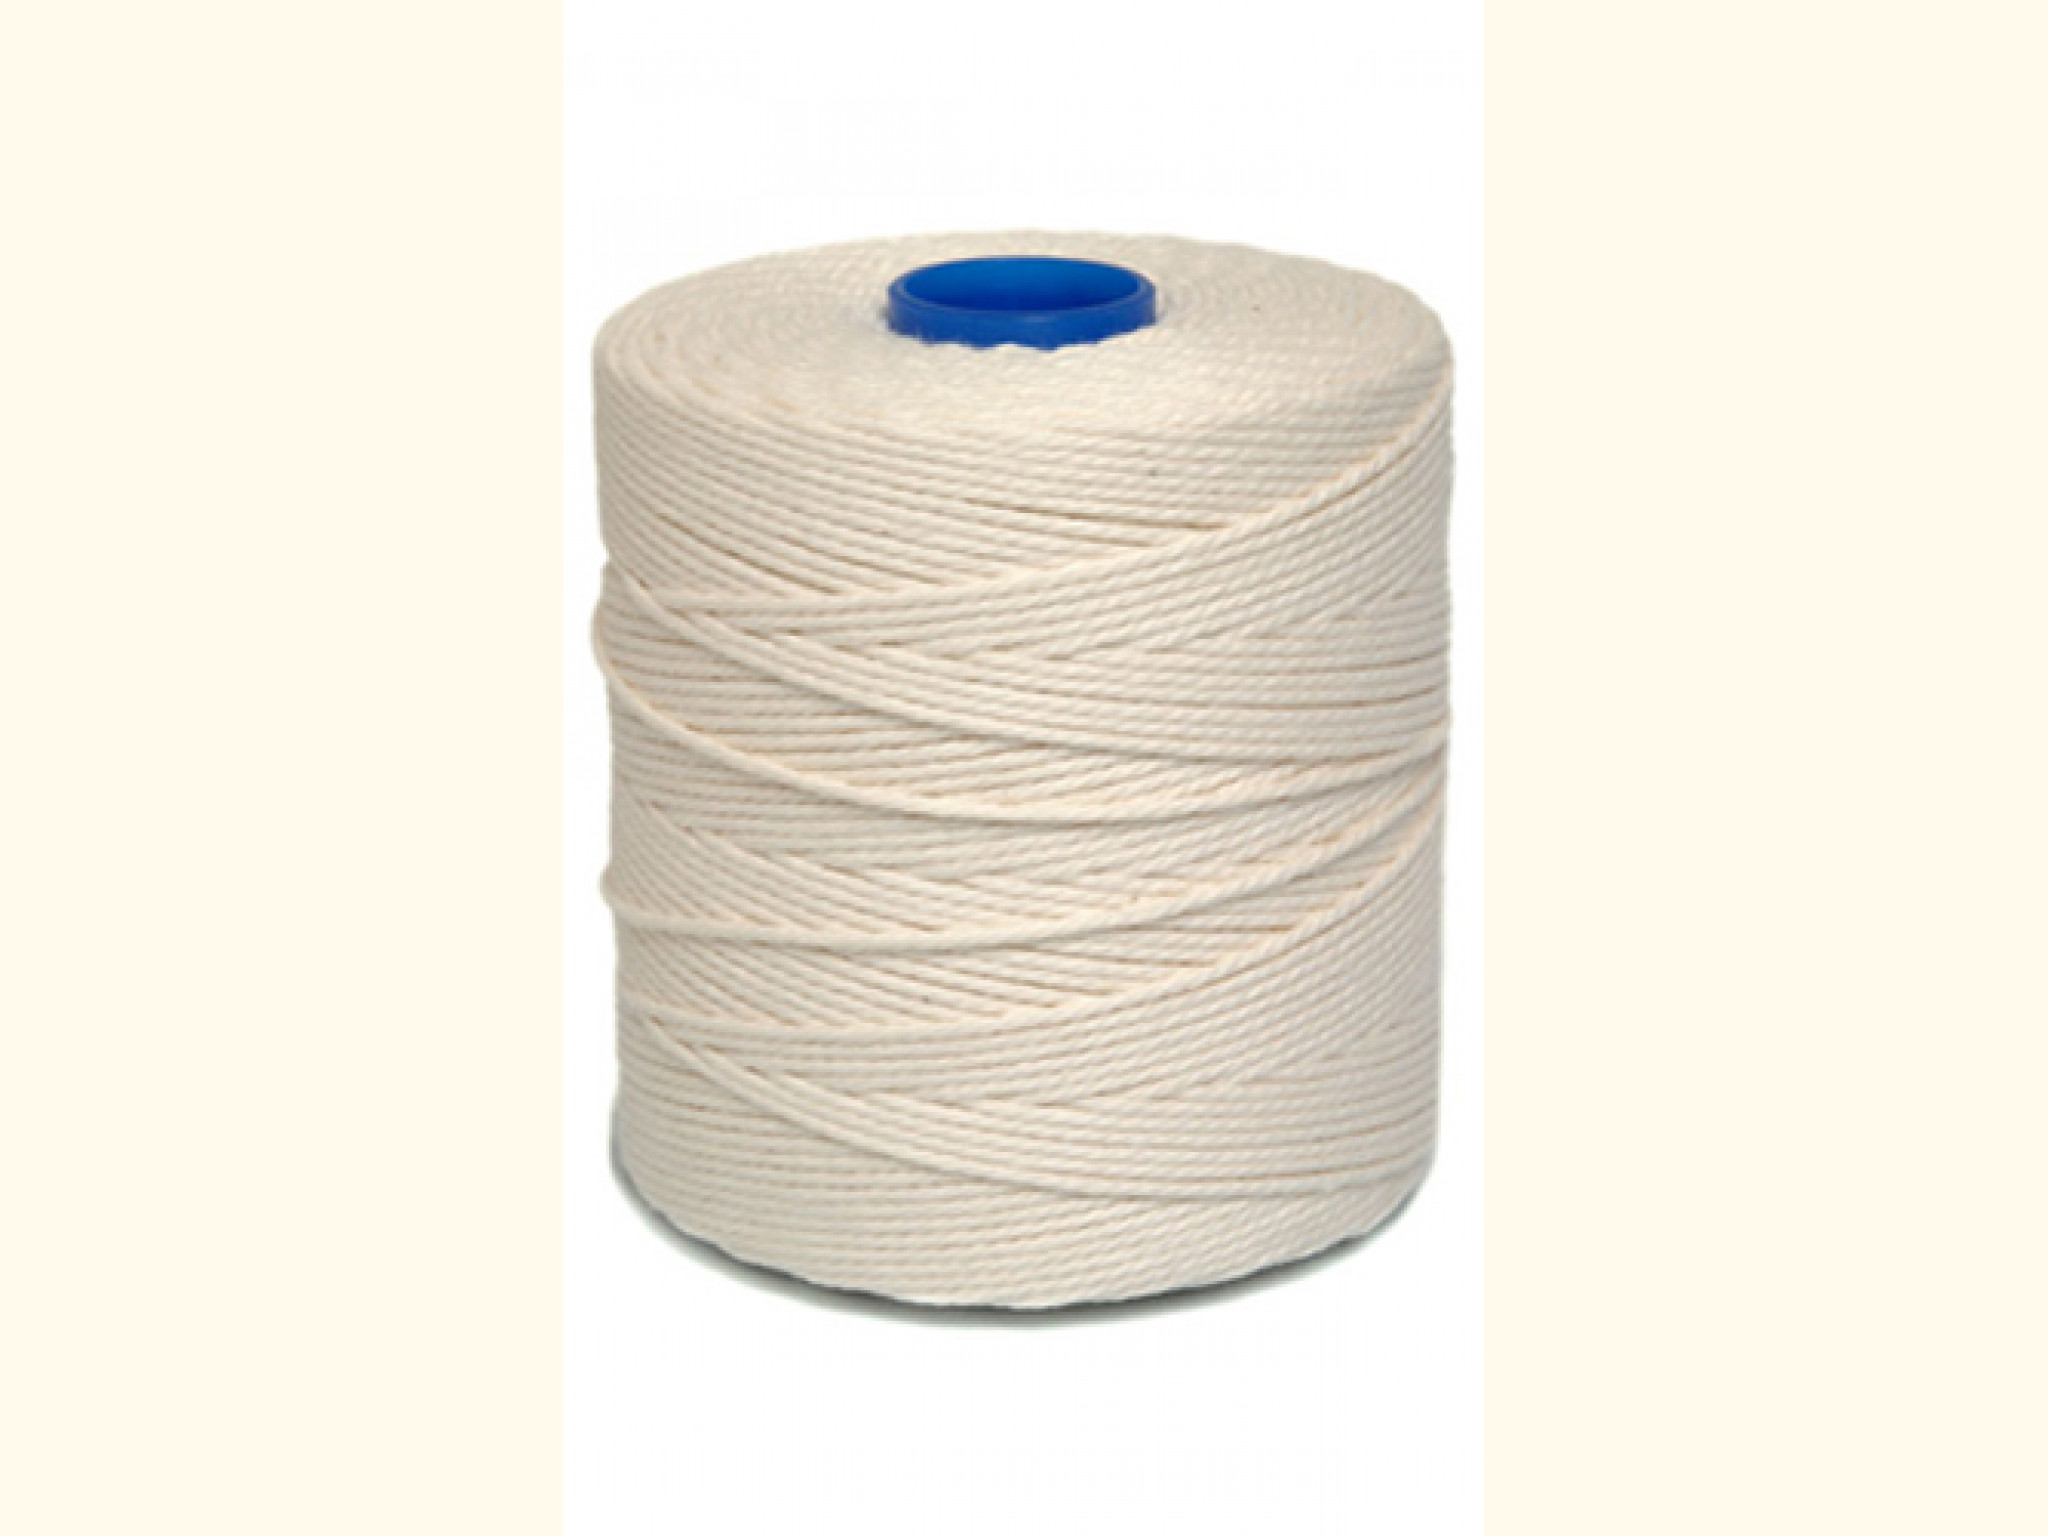 No 4 White Butchers Bakers Catering Twine String  Food Safe Certified Spool 300m 